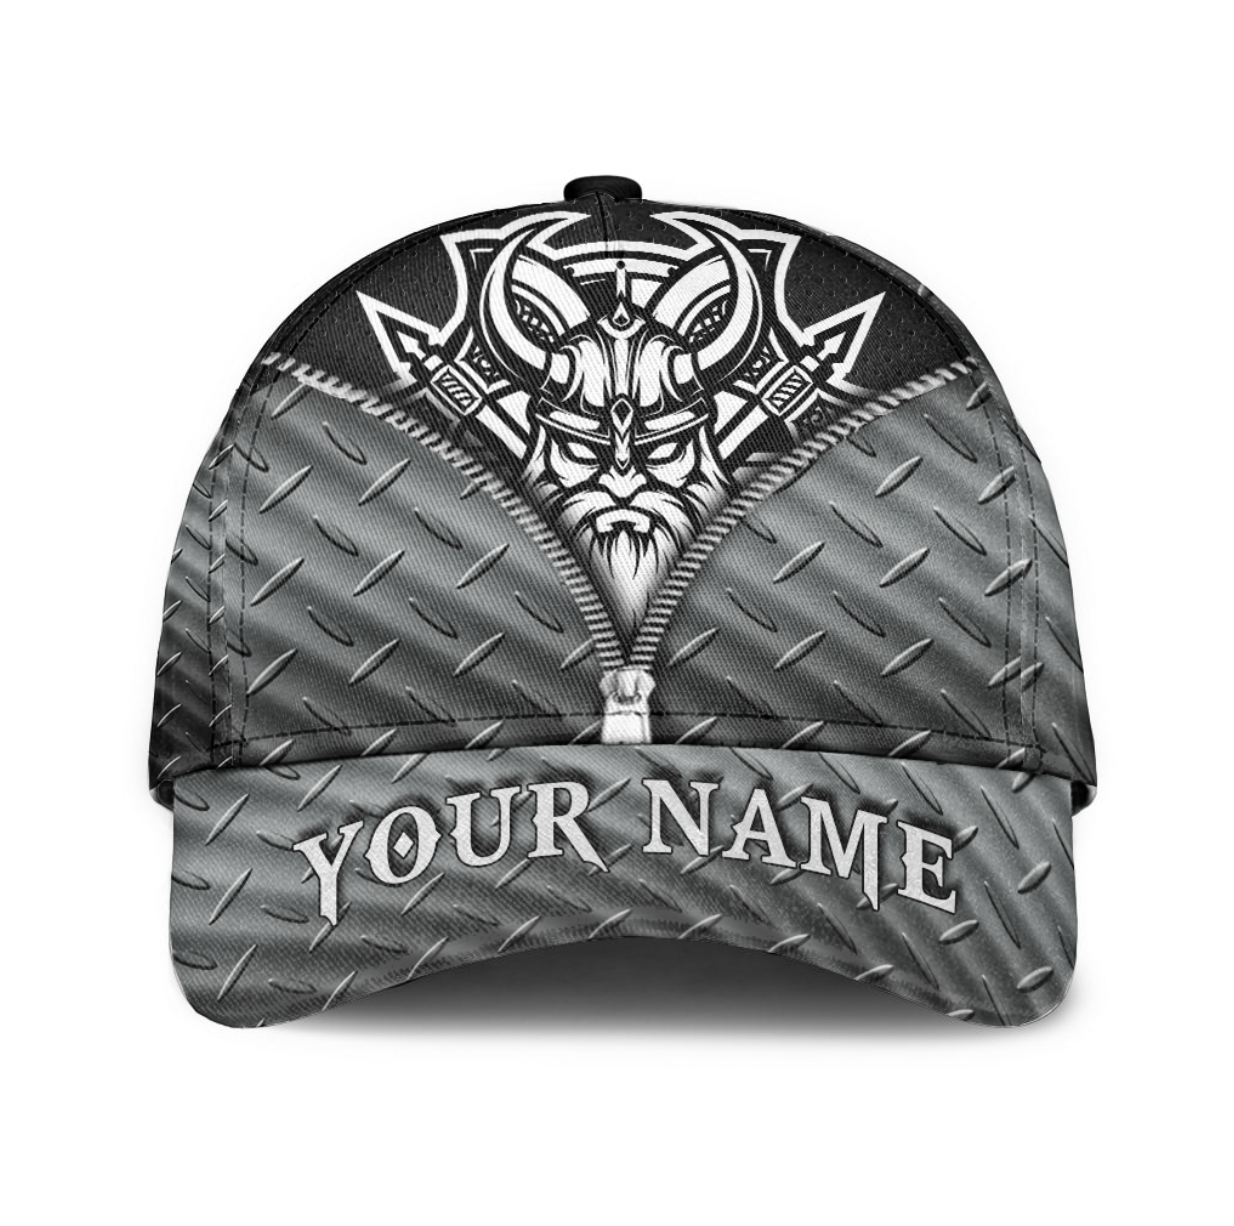 custom-viking-classic-cap-black-and-white-head-with-shield-and-axe-classic-cap